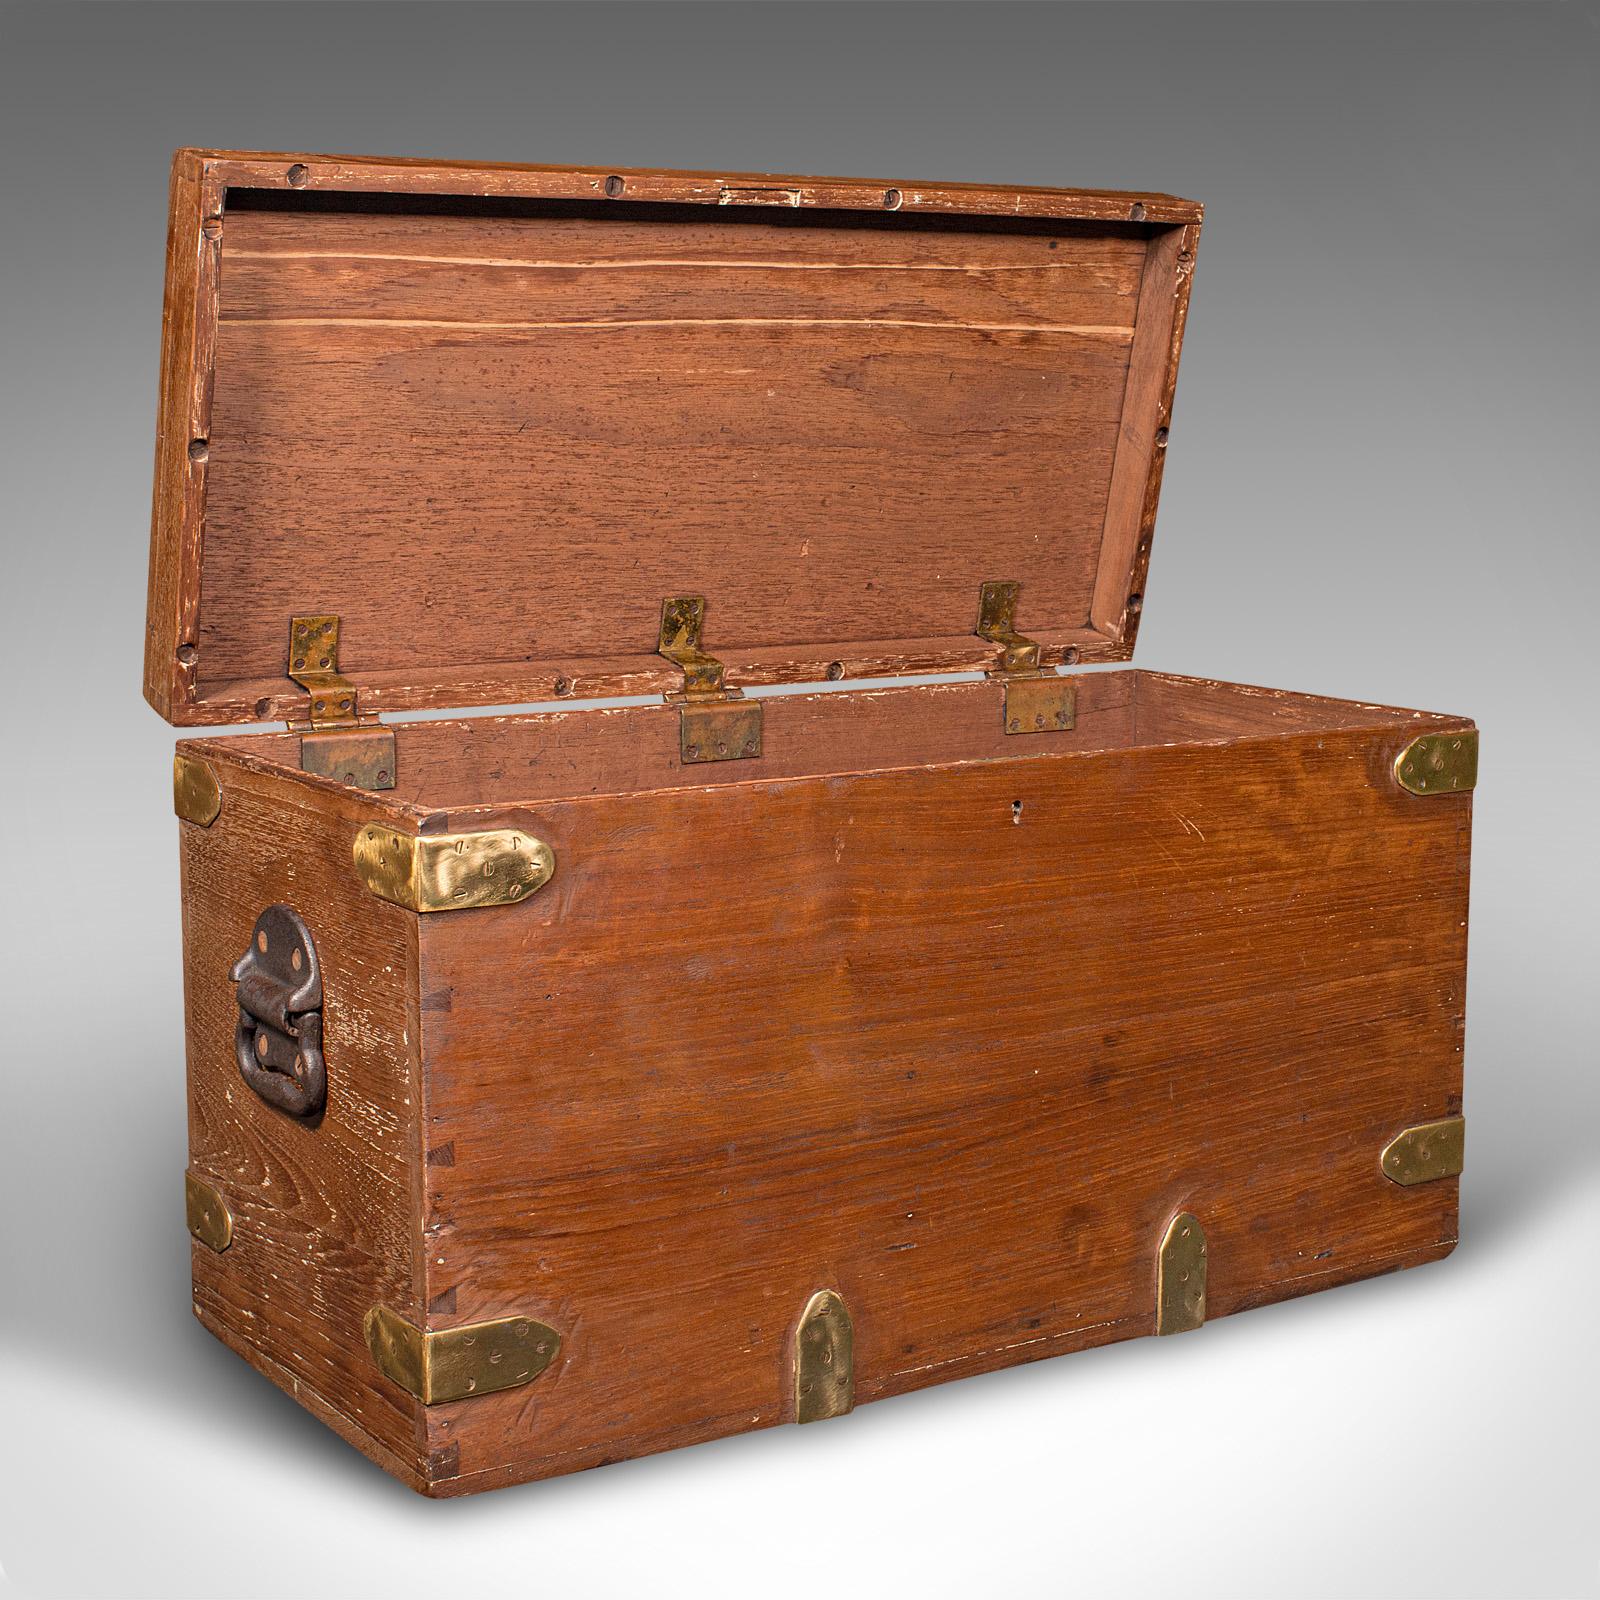 This is an antique workman's tool chest. An English, teak and brass capped craftsman's trunk, dating to the late Victorian period, circa 1880.

Delightfully time-worn chest with a robust appeal
Displays a desirable aged patina throughout
Teak stocks